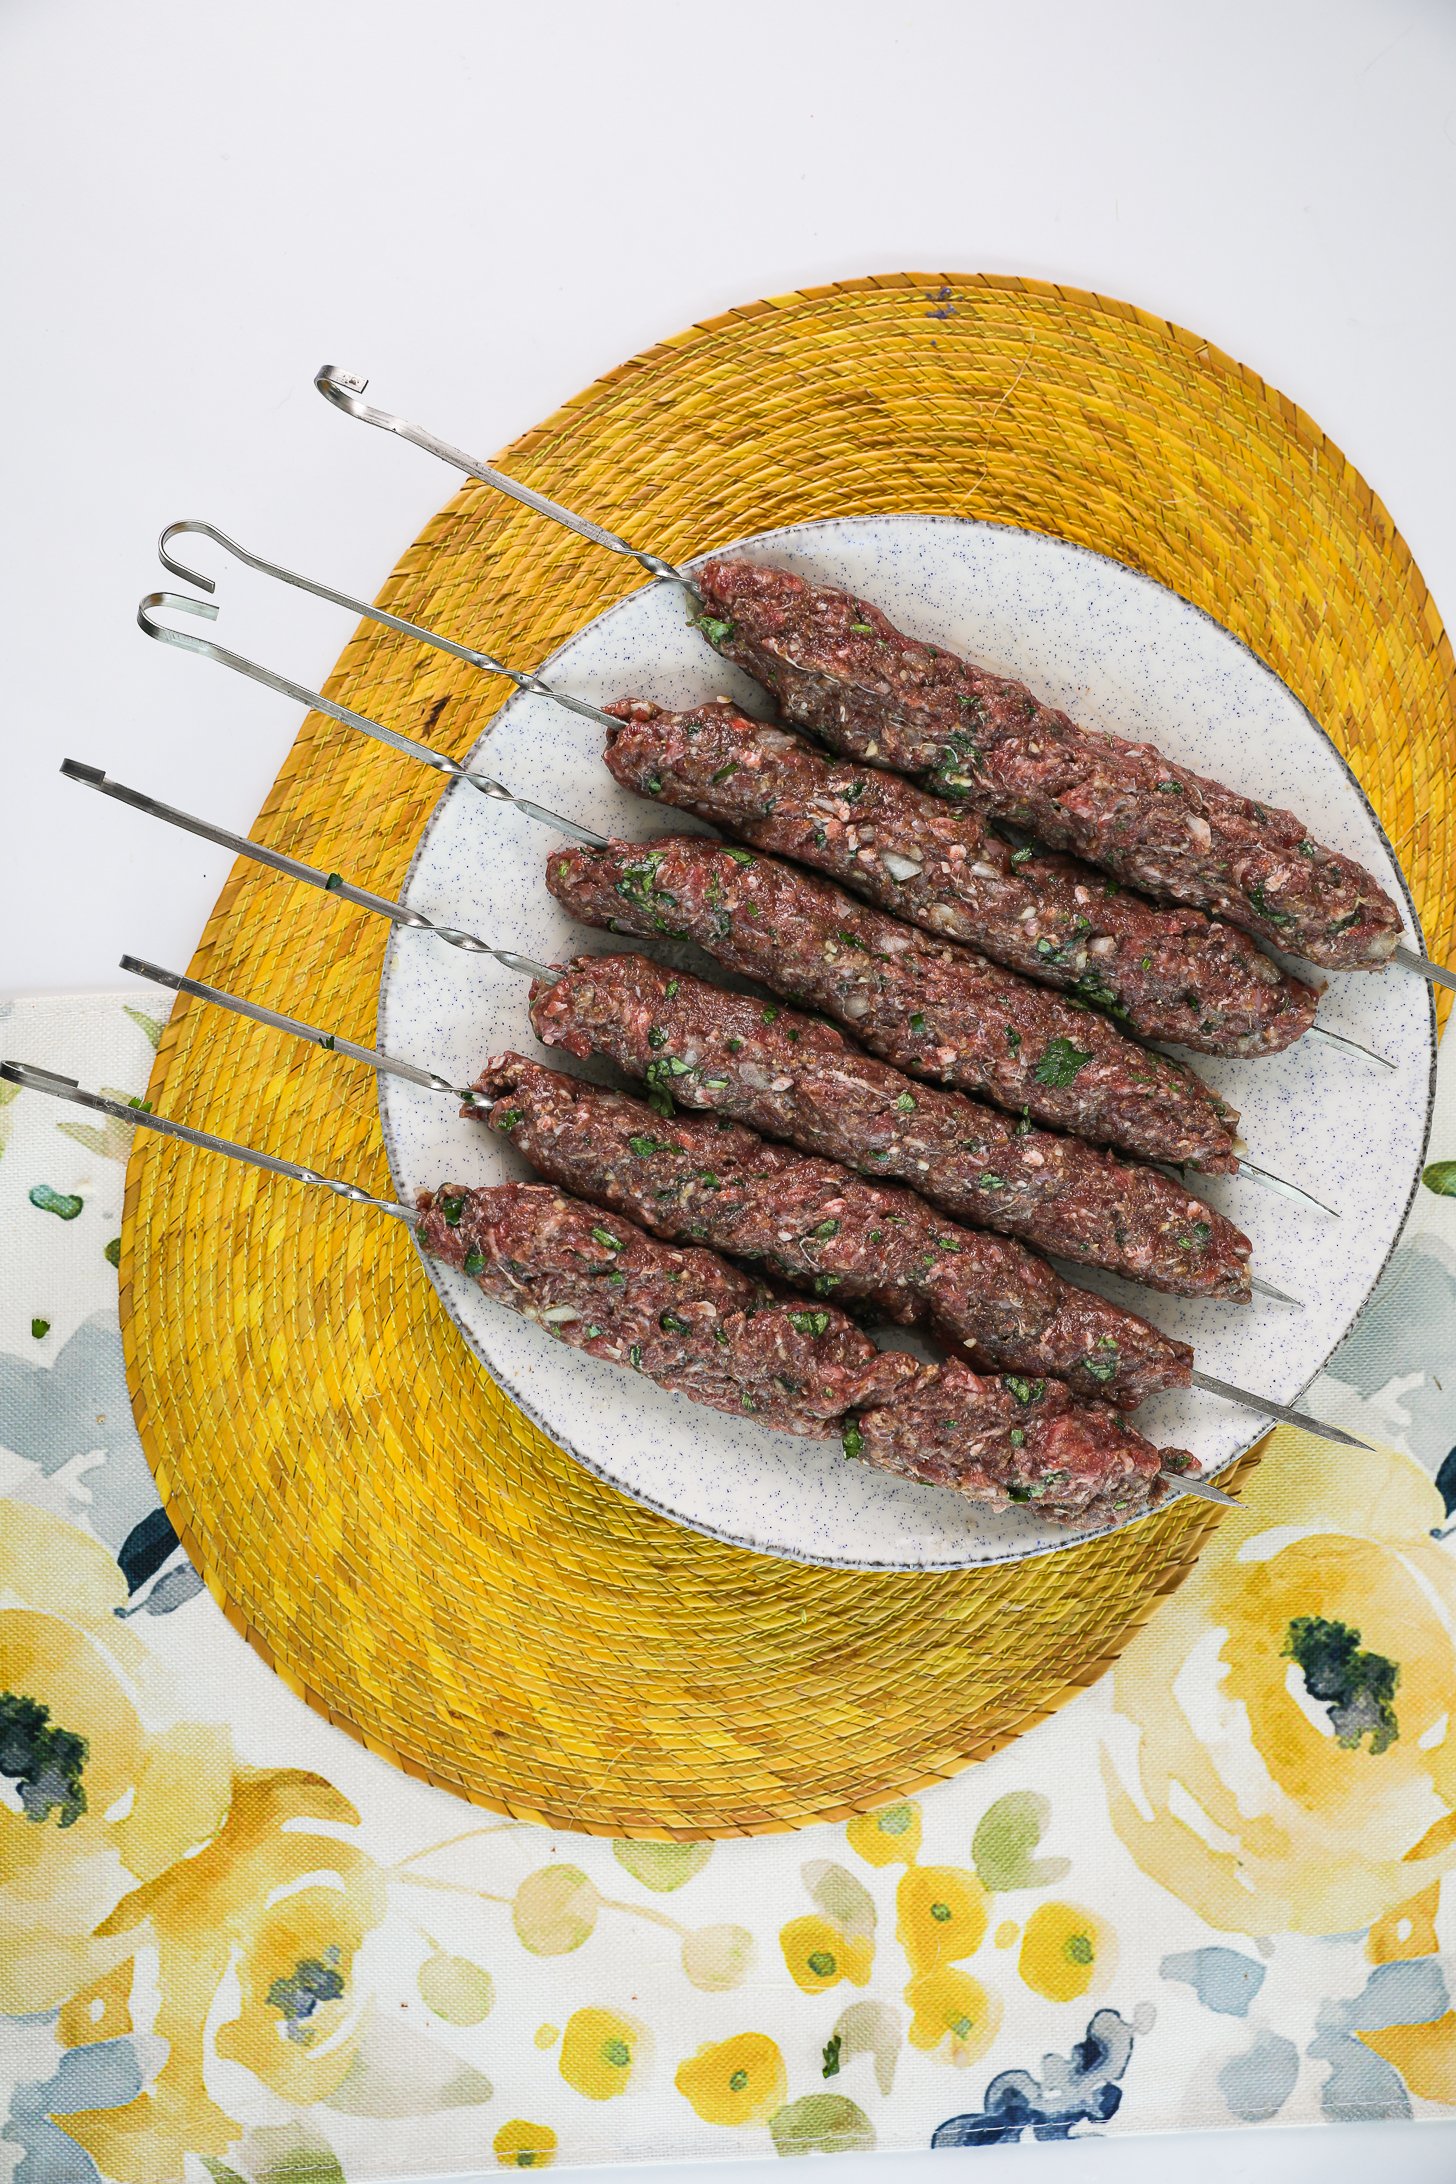 Perspective view of raw mince beef kebabs on skewers on a plate.